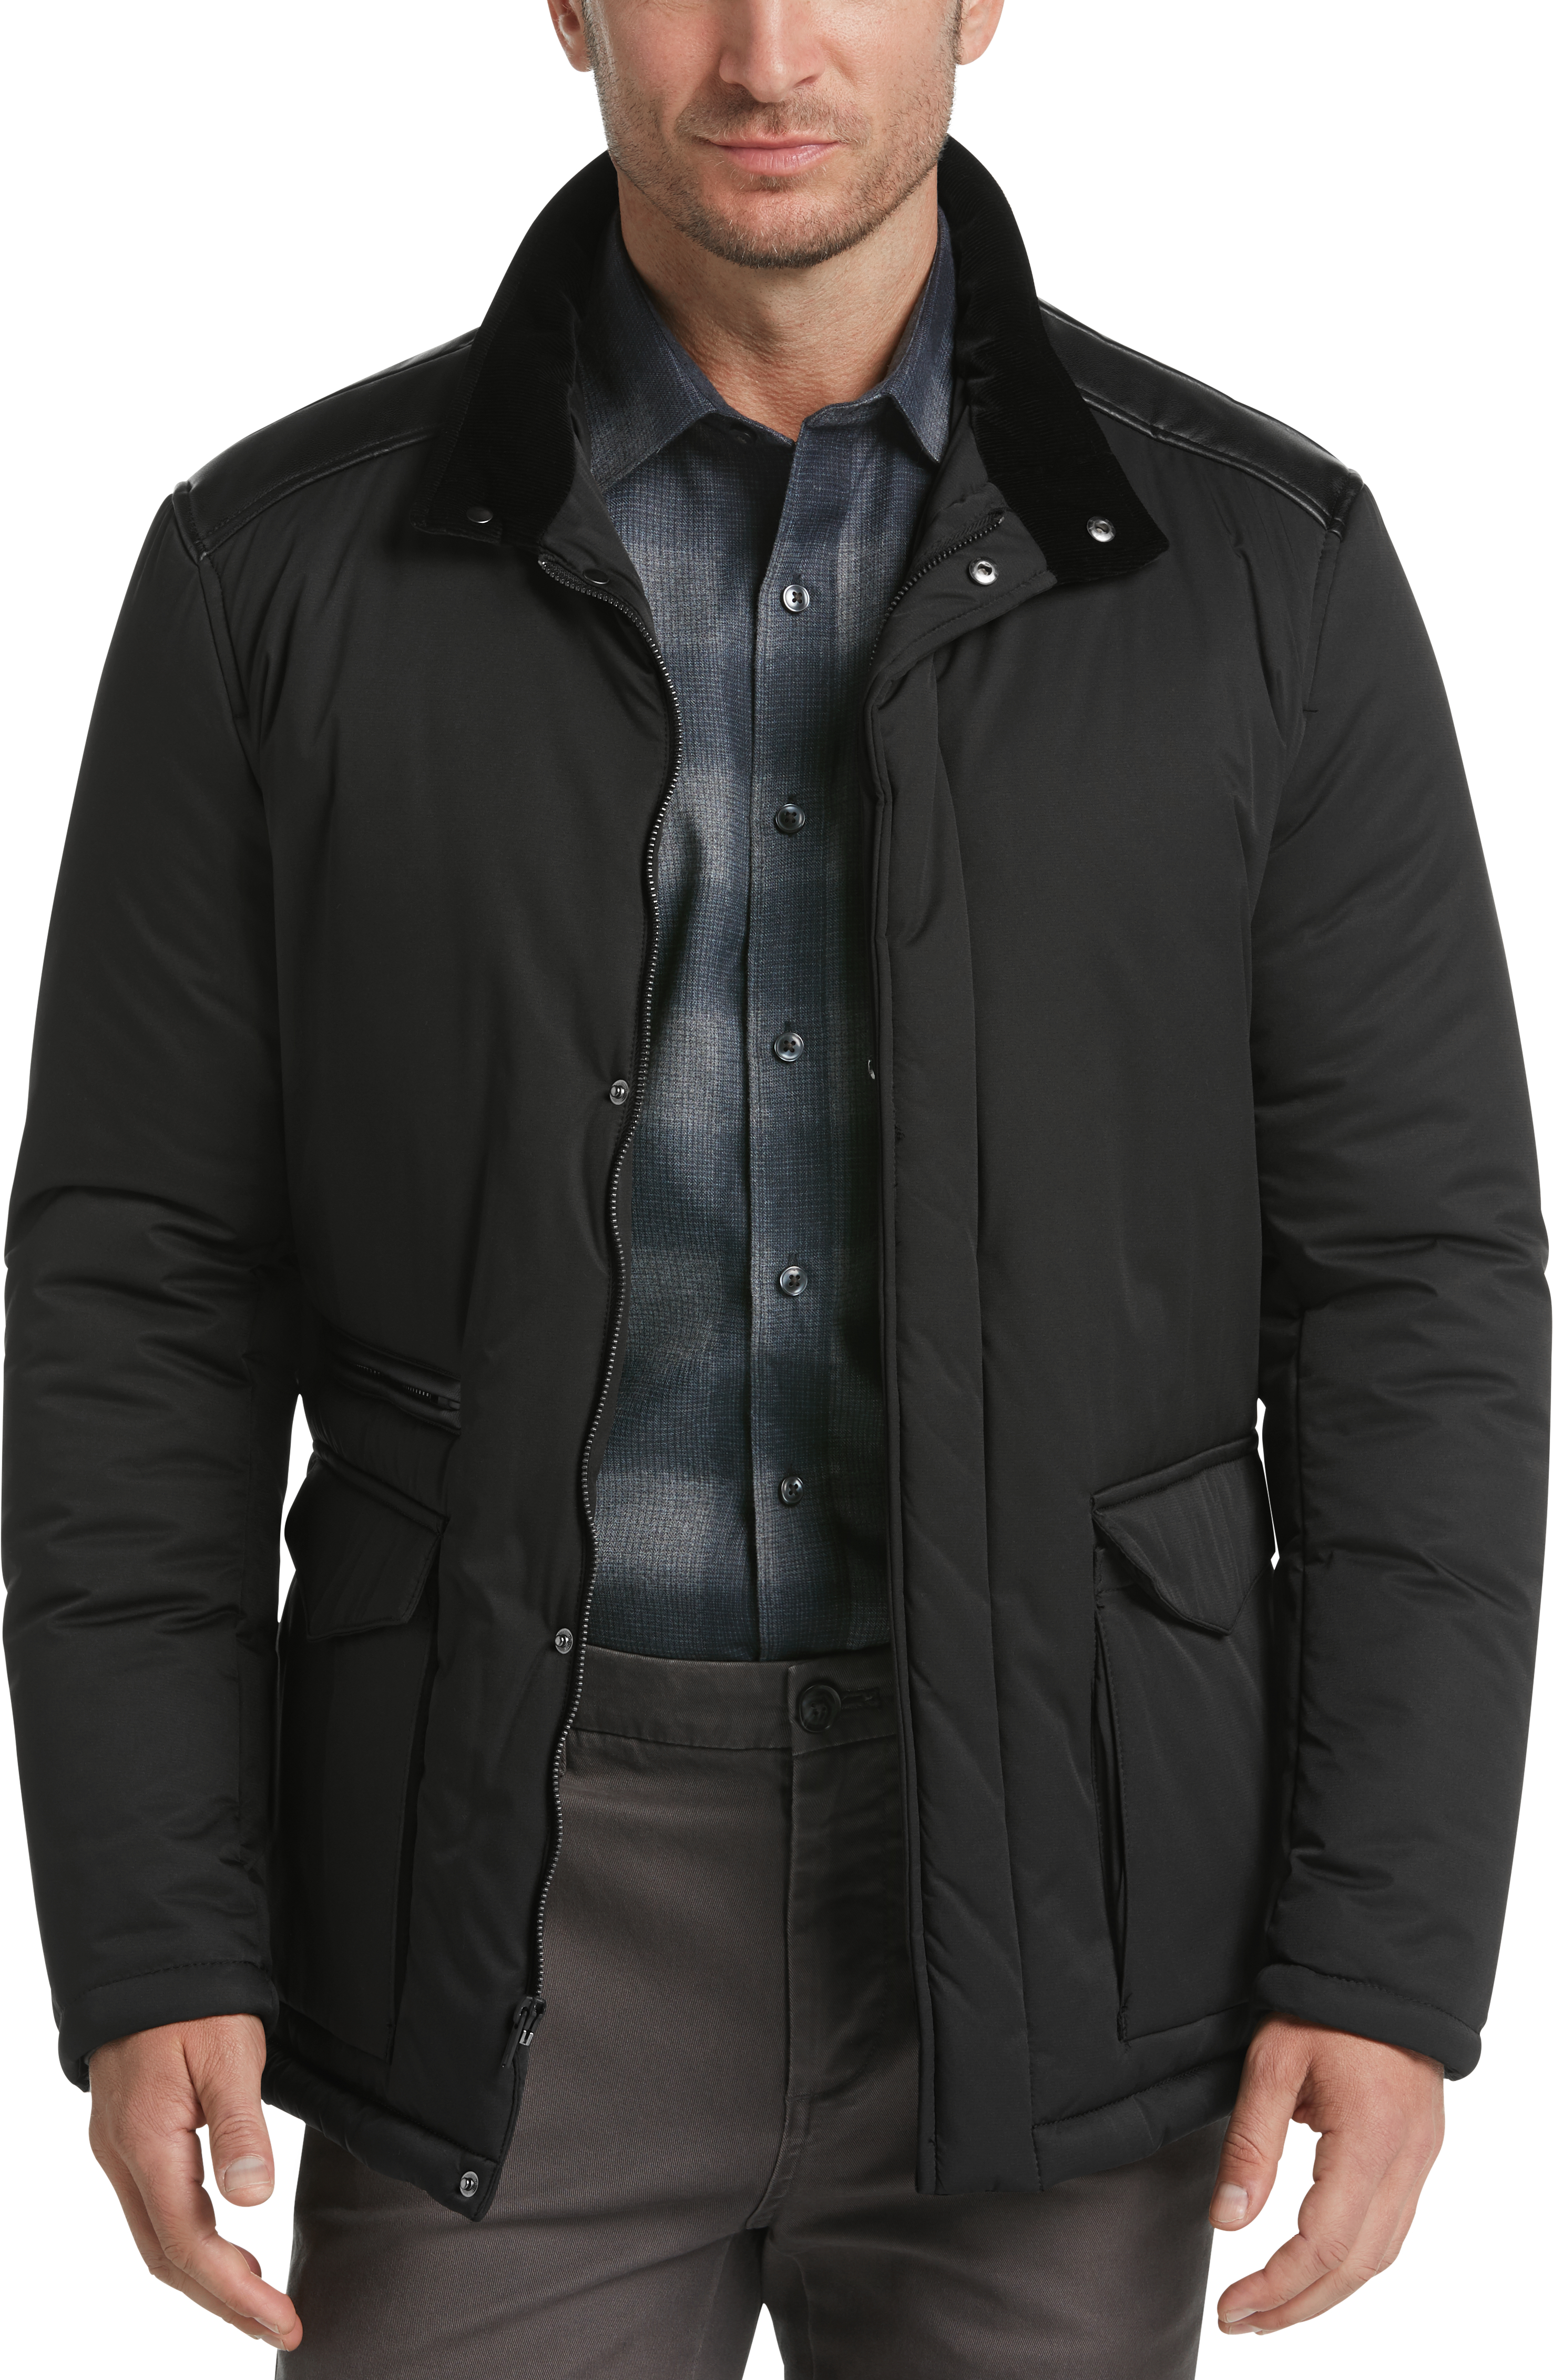 Pronto Uomo Black Quilted Jacket - Men's Big & Tall | Men's Wearhouse